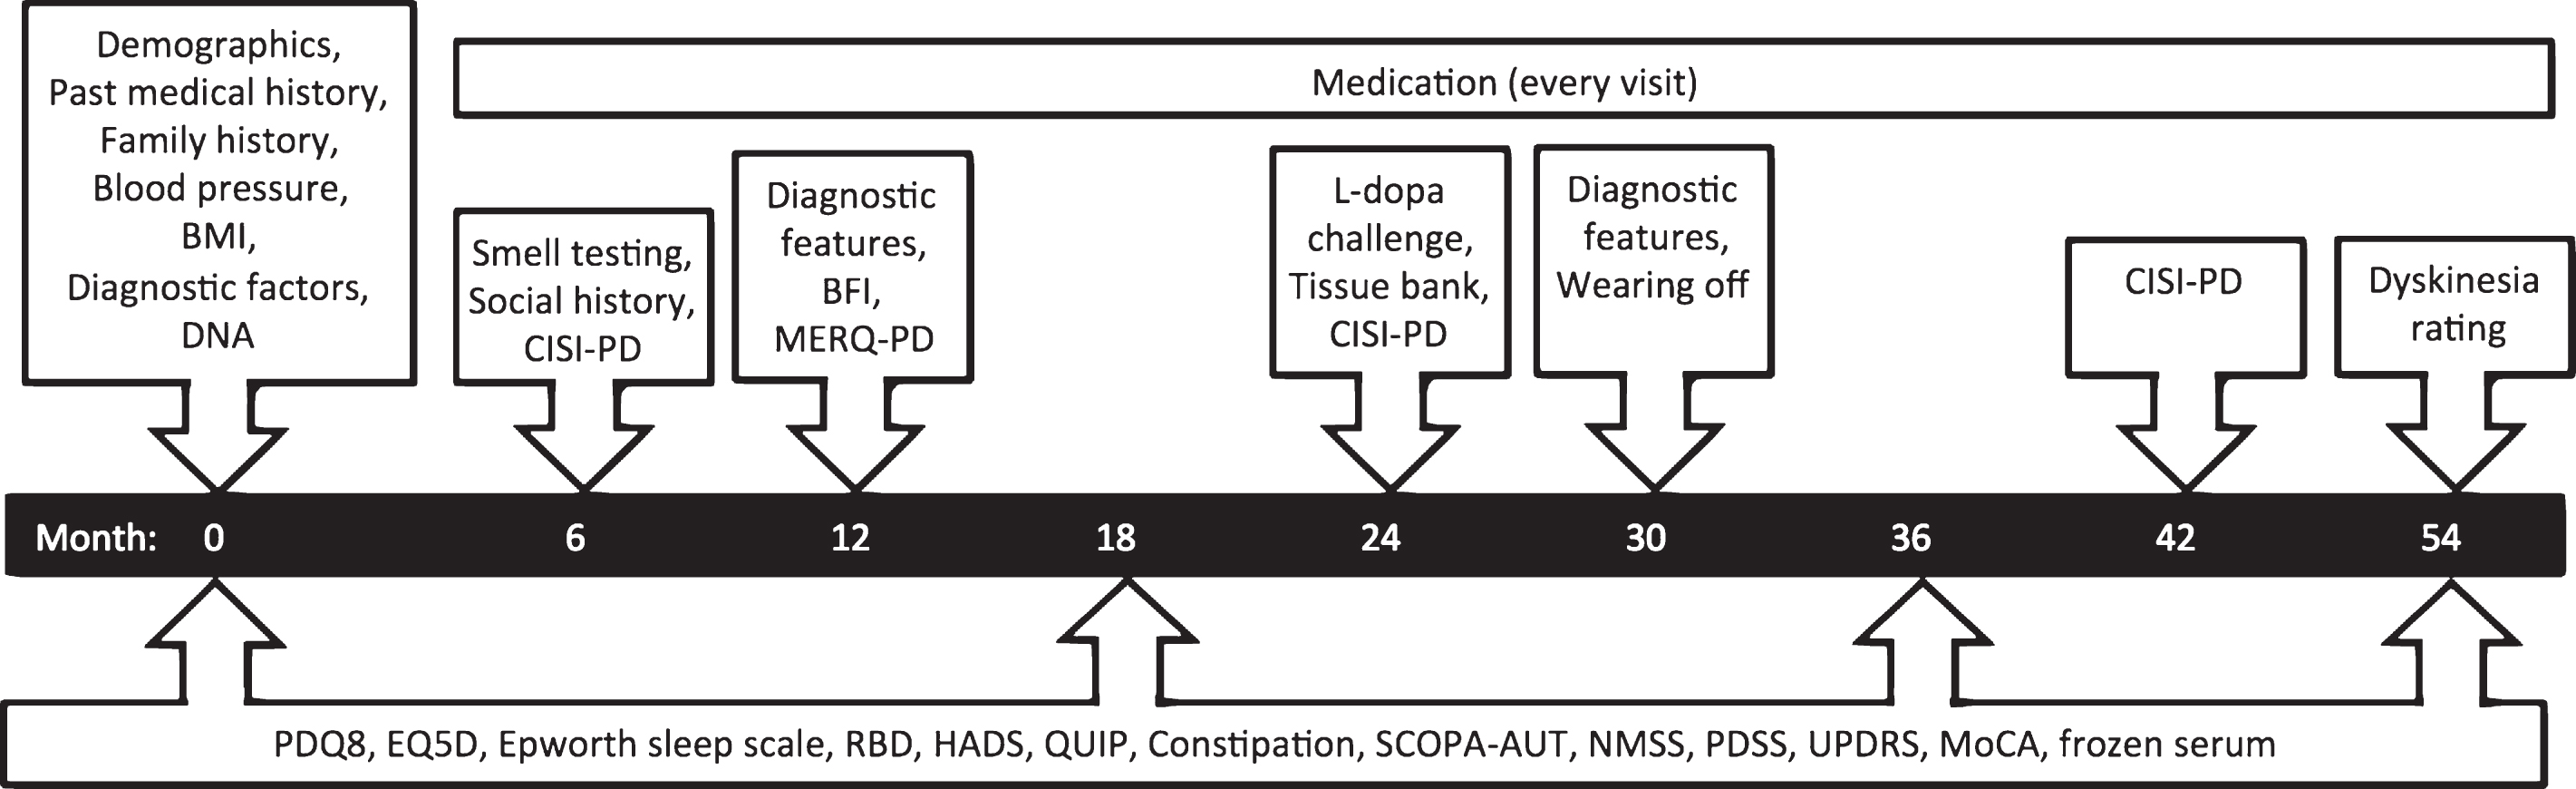 Assessments and timeline for recent onset patients. Visits occur every 6 months, with repeated observations and blood sampling every 18 months.